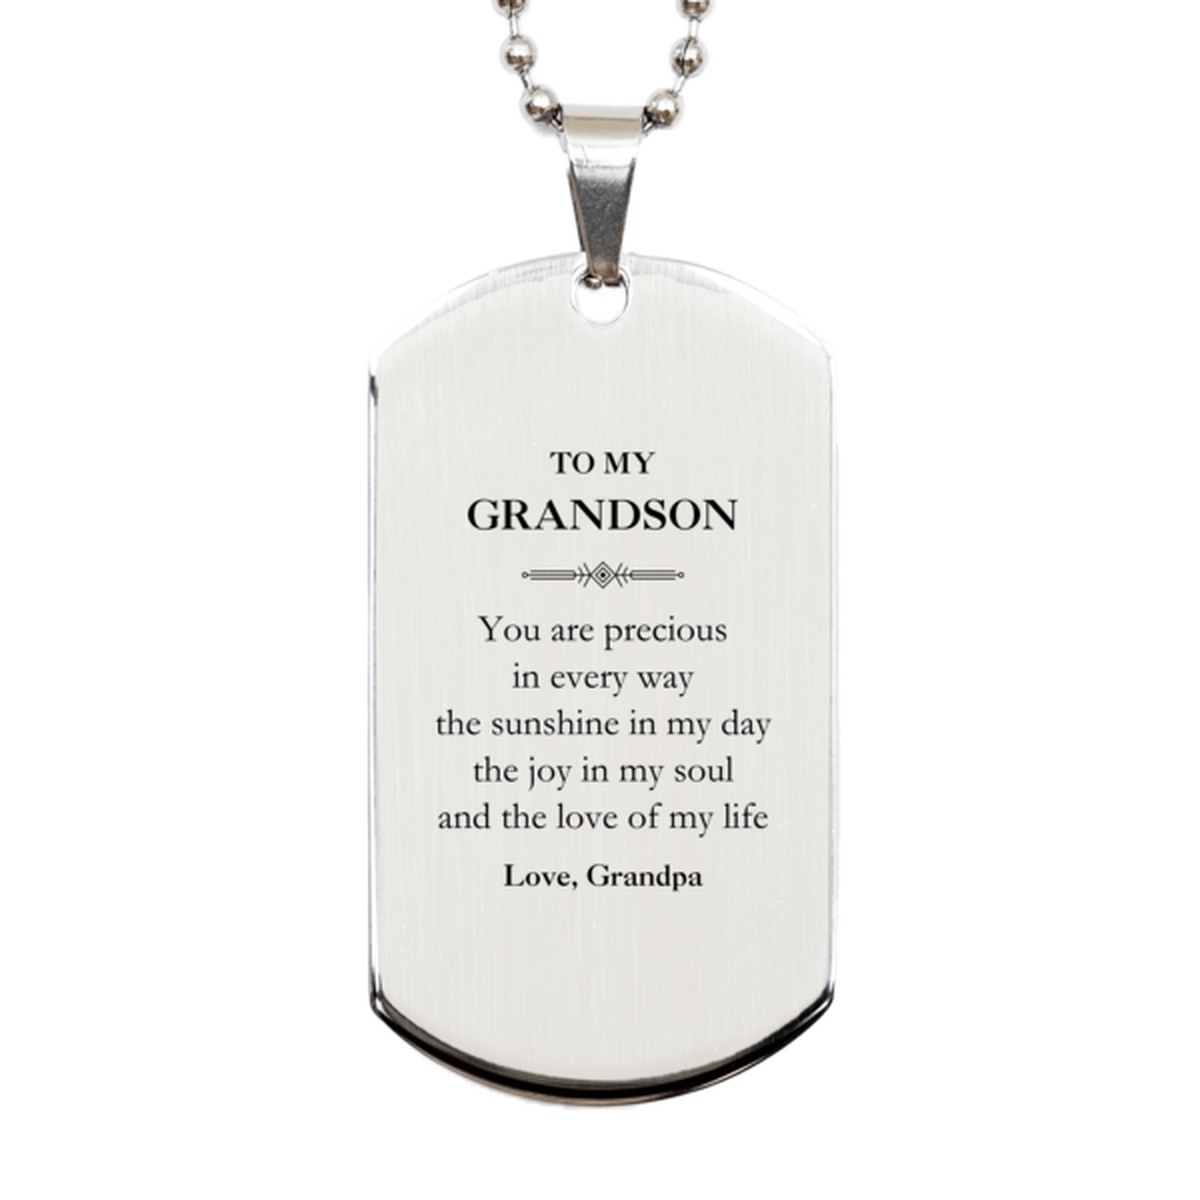 Graduation Gifts for Grandson Silver Dog Tag Present from Grandpa, Christmas Grandson Birthday Gifts Grandson You are precious in every way the sunshine in my day. Love, Grandpa